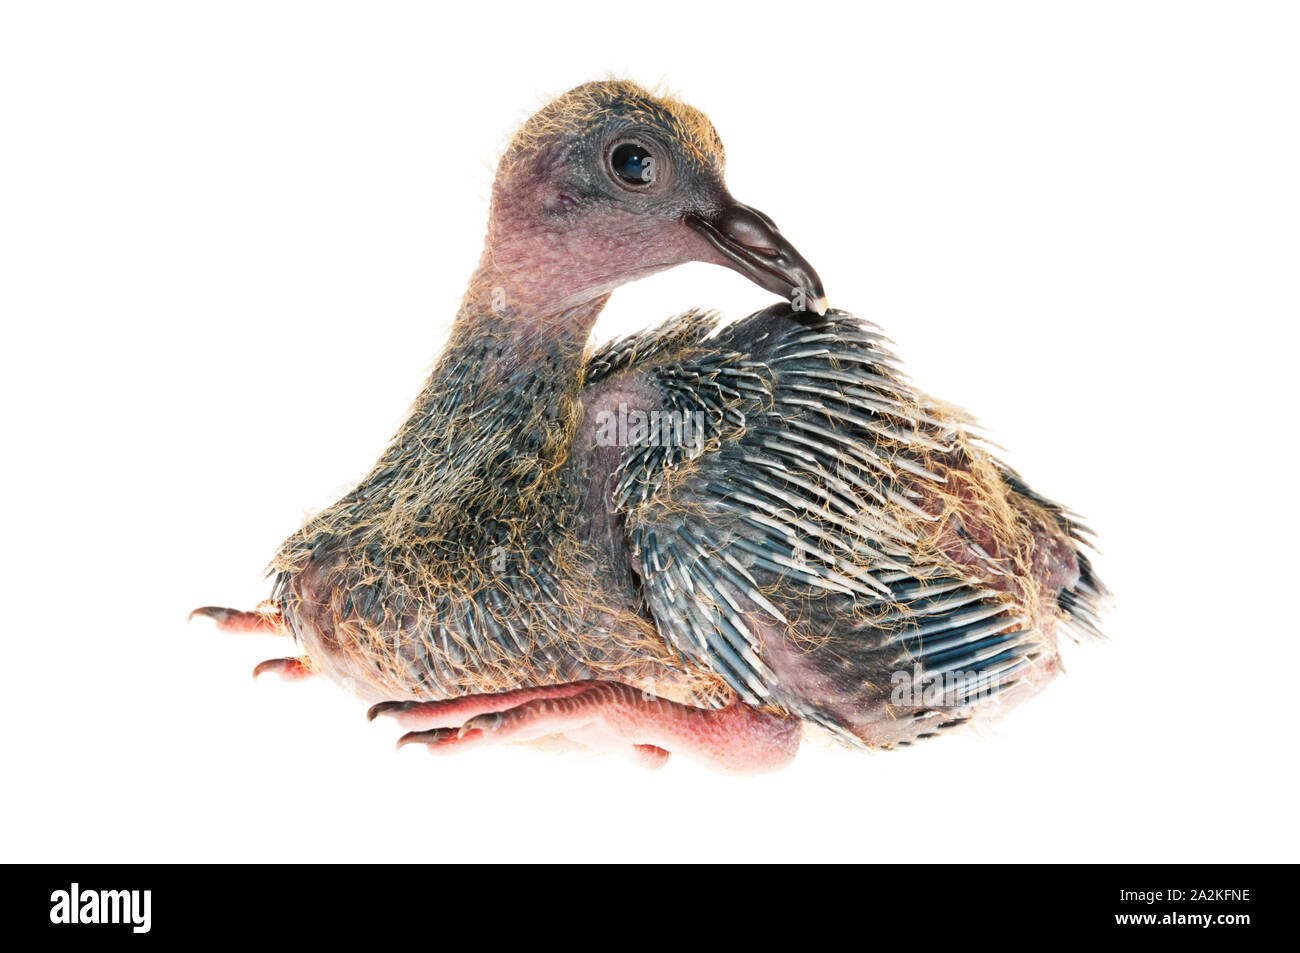 Baby pigeon isolated on white background Stock Photo